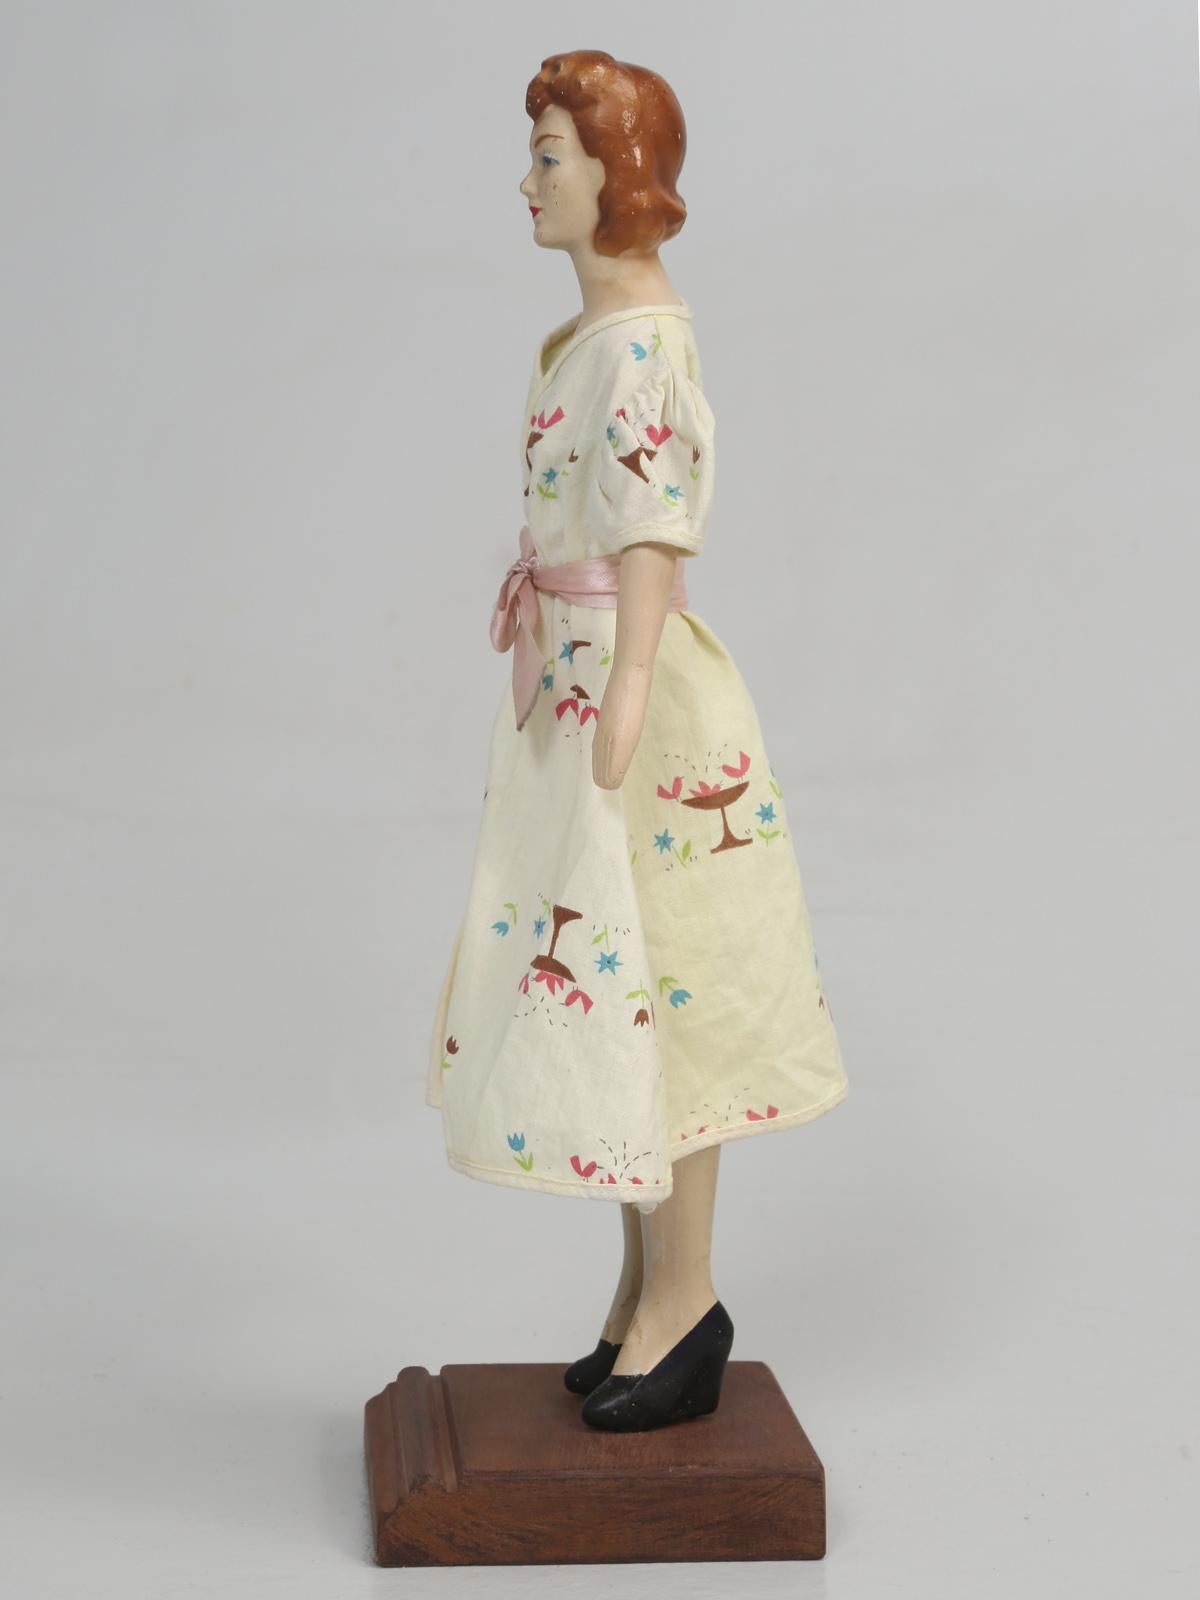 Miniature Department Store Mannequin, Used on a Display Counter 6